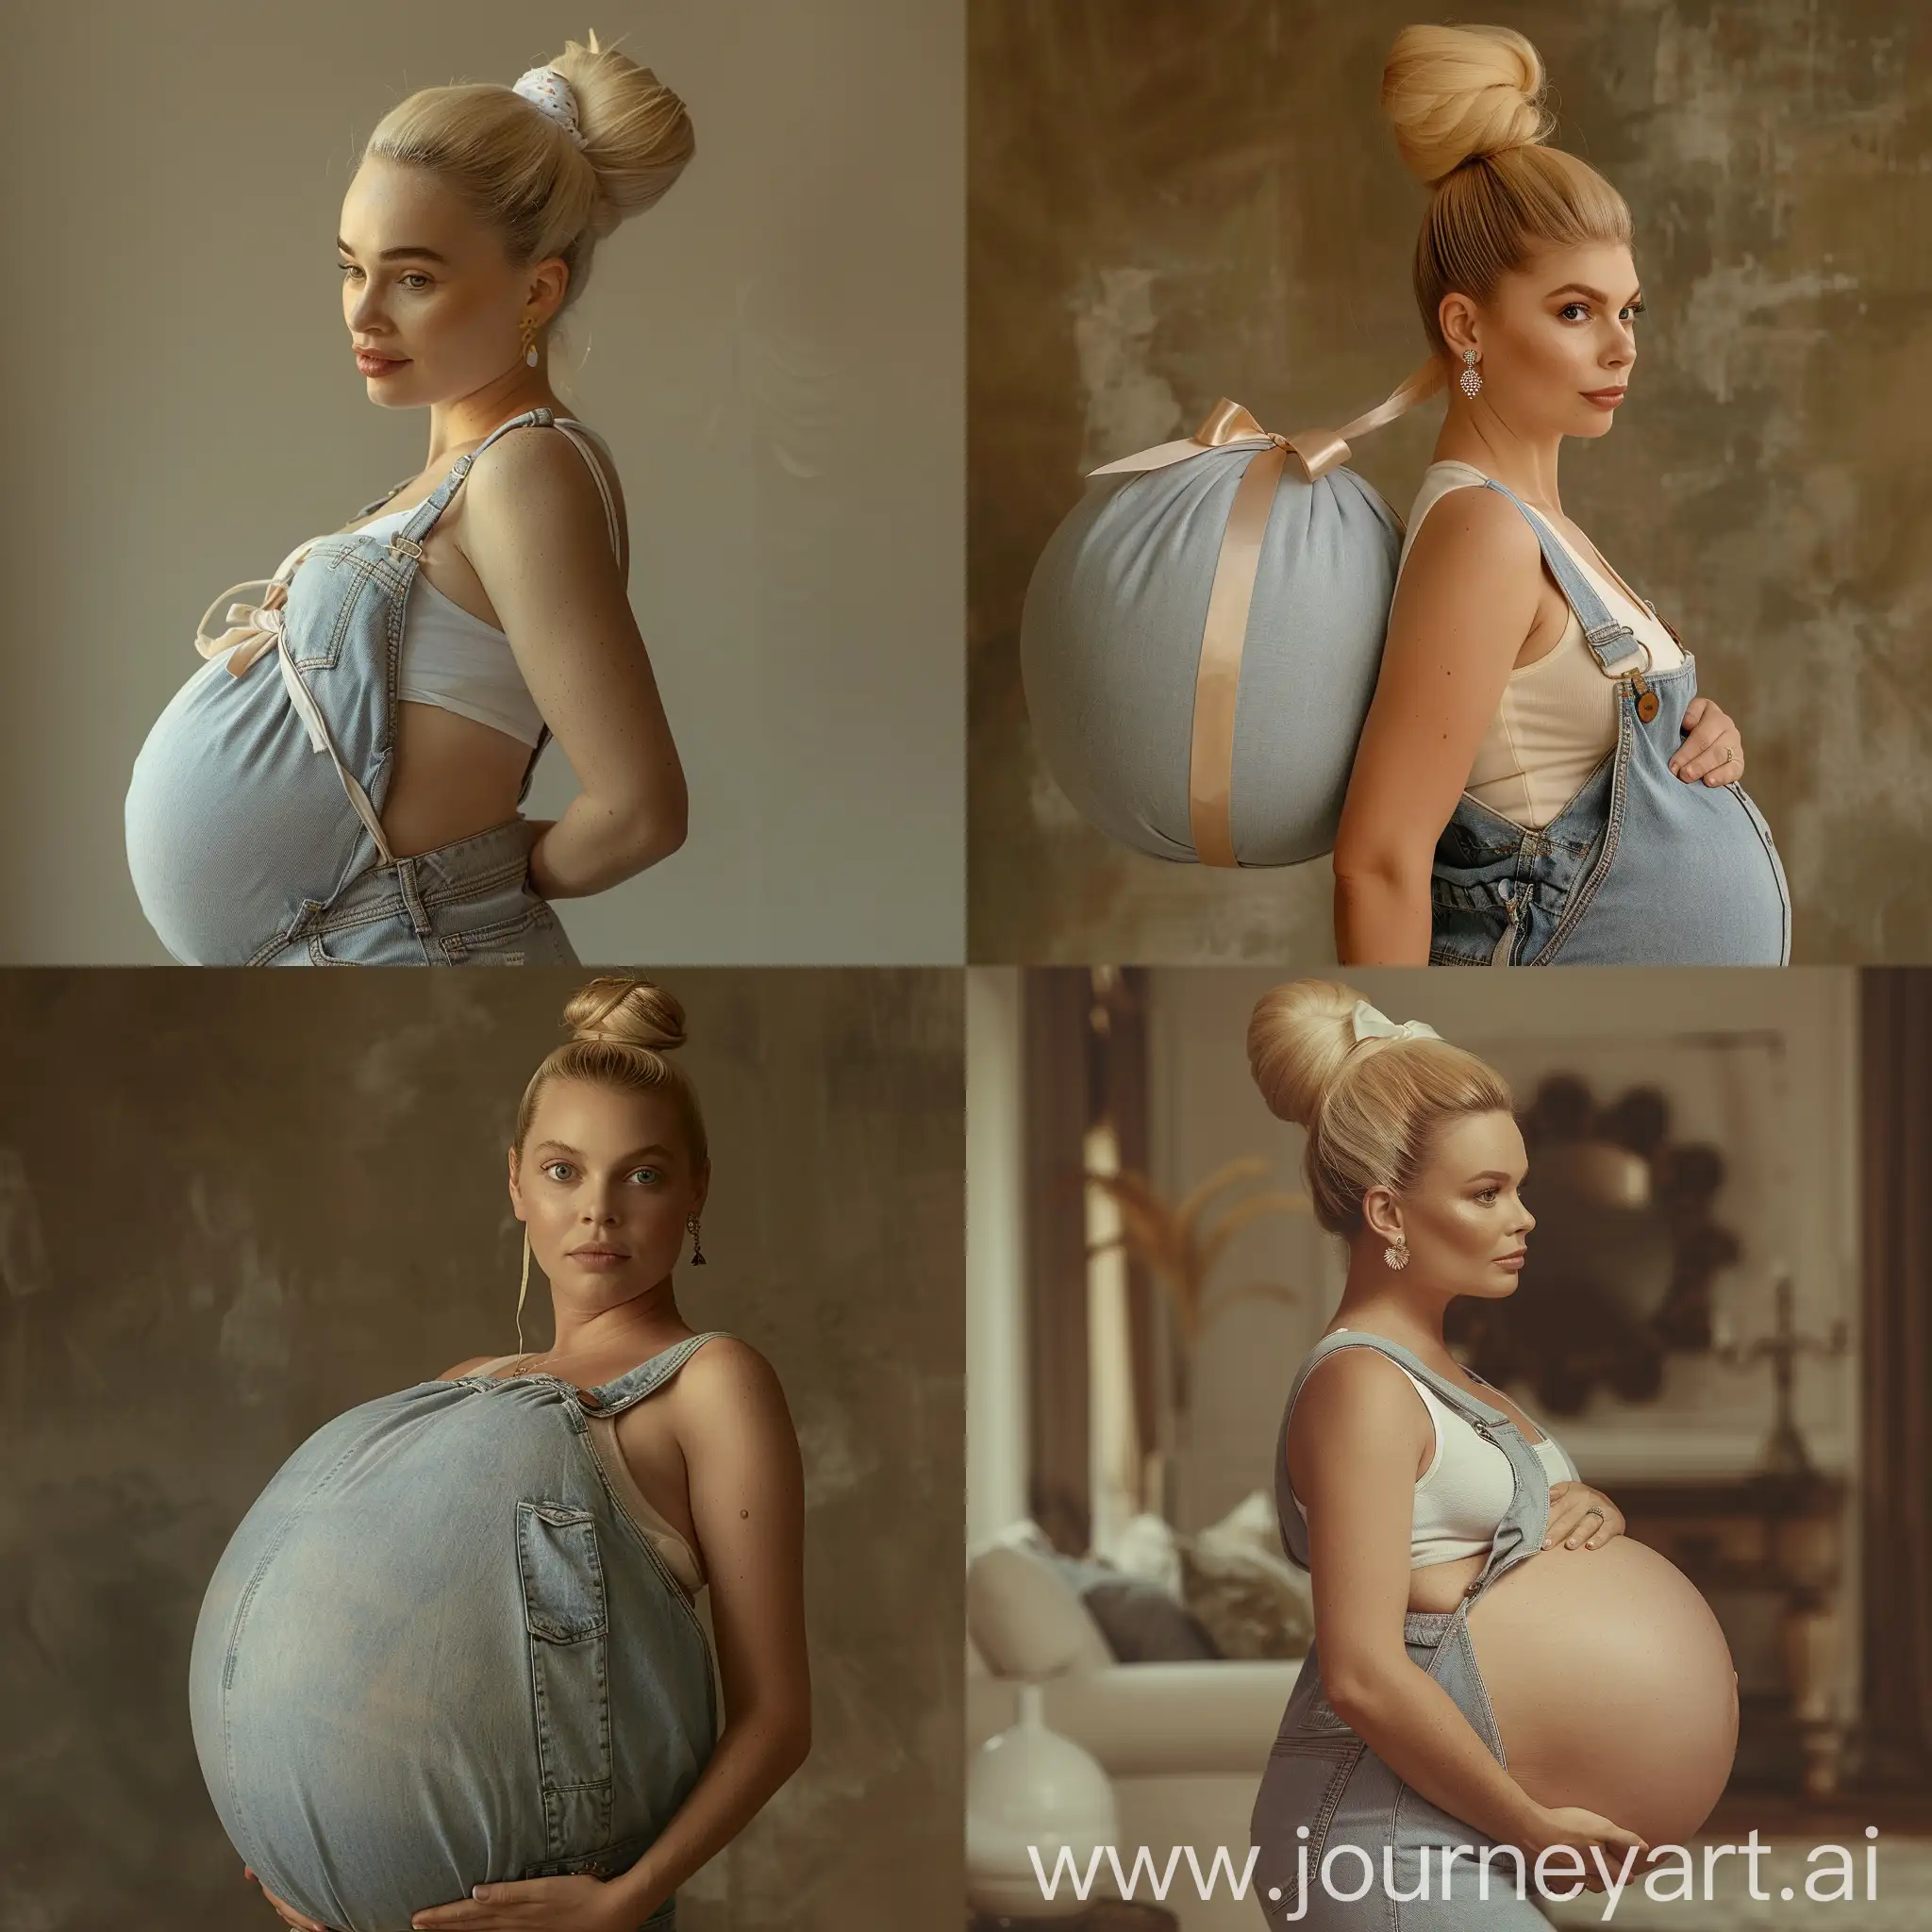 Radiant-Pregnant-Model-in-Elegant-Overalls-Beauty-and-Strength-in-Natural-Light